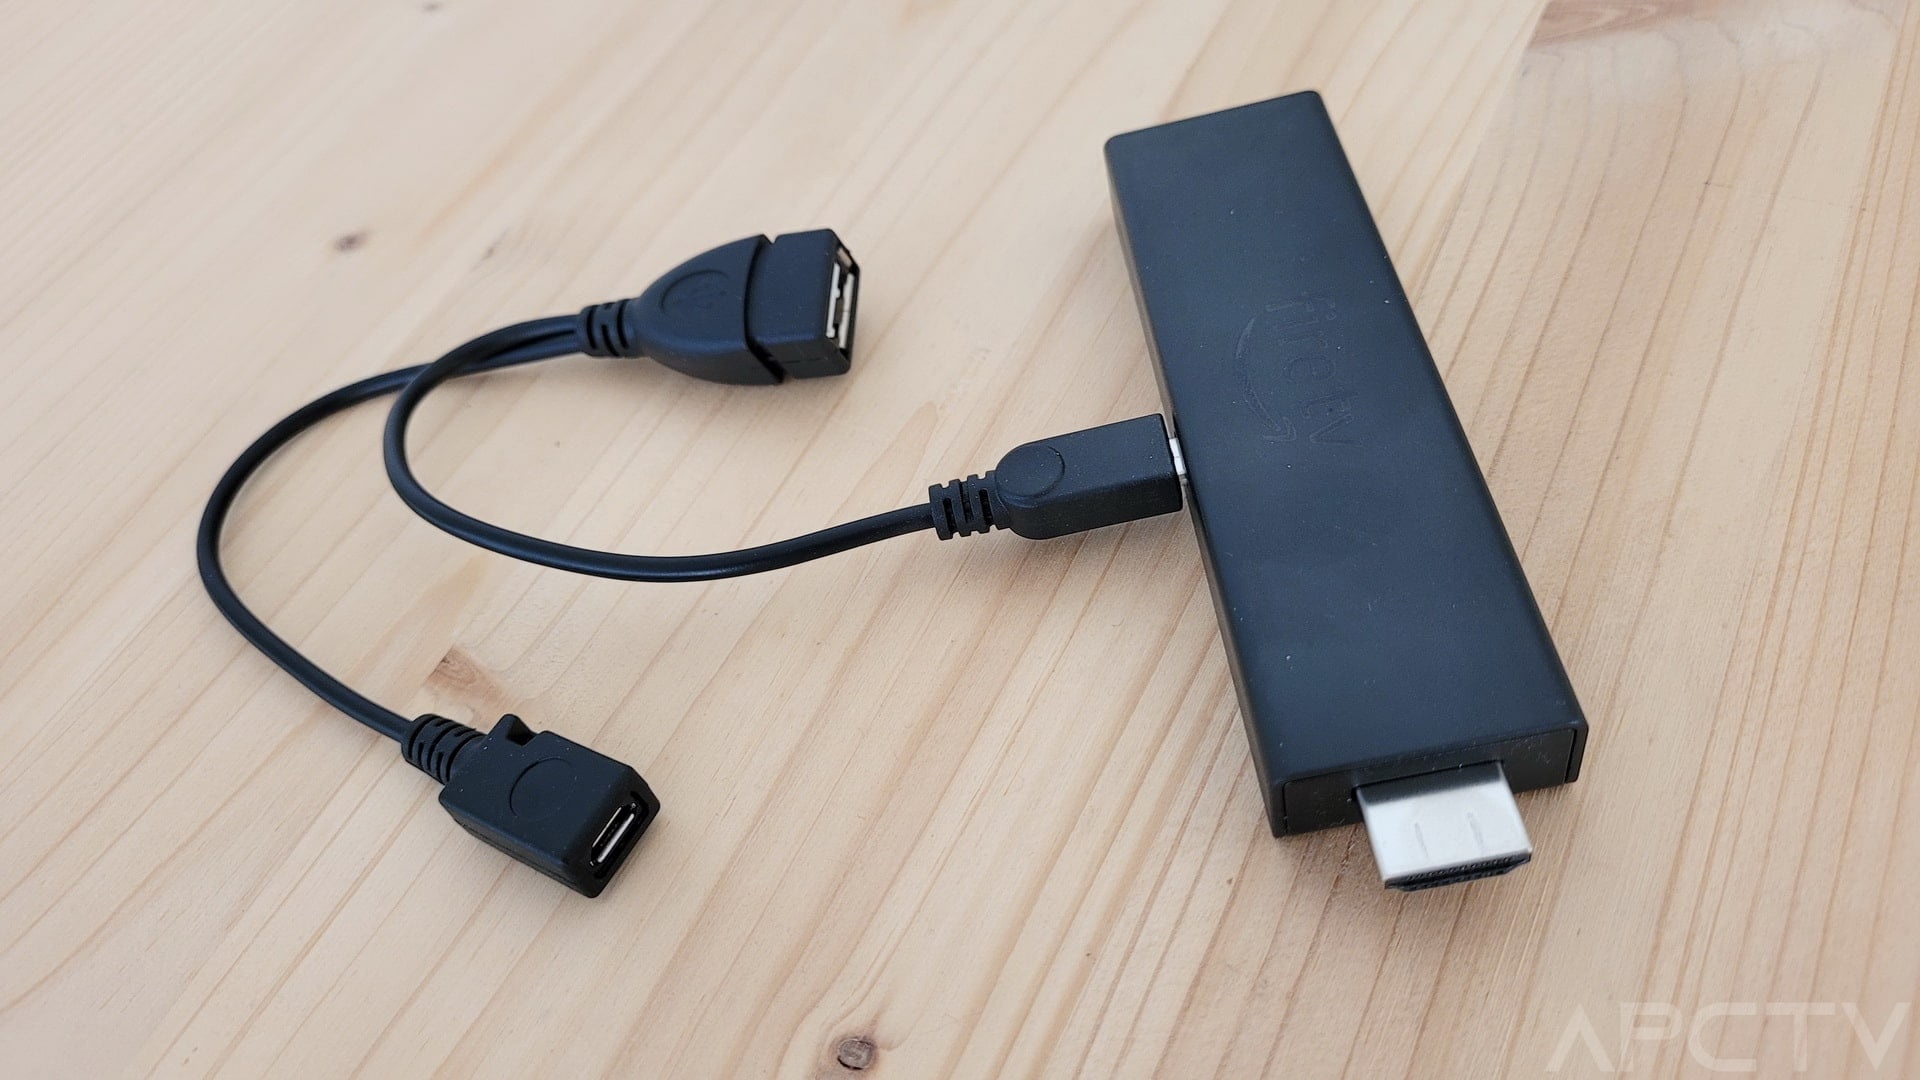 REVIEW: Fire TV Stick 4K Max, the most powerful TV-Stick for streaming  AndroidPCtv